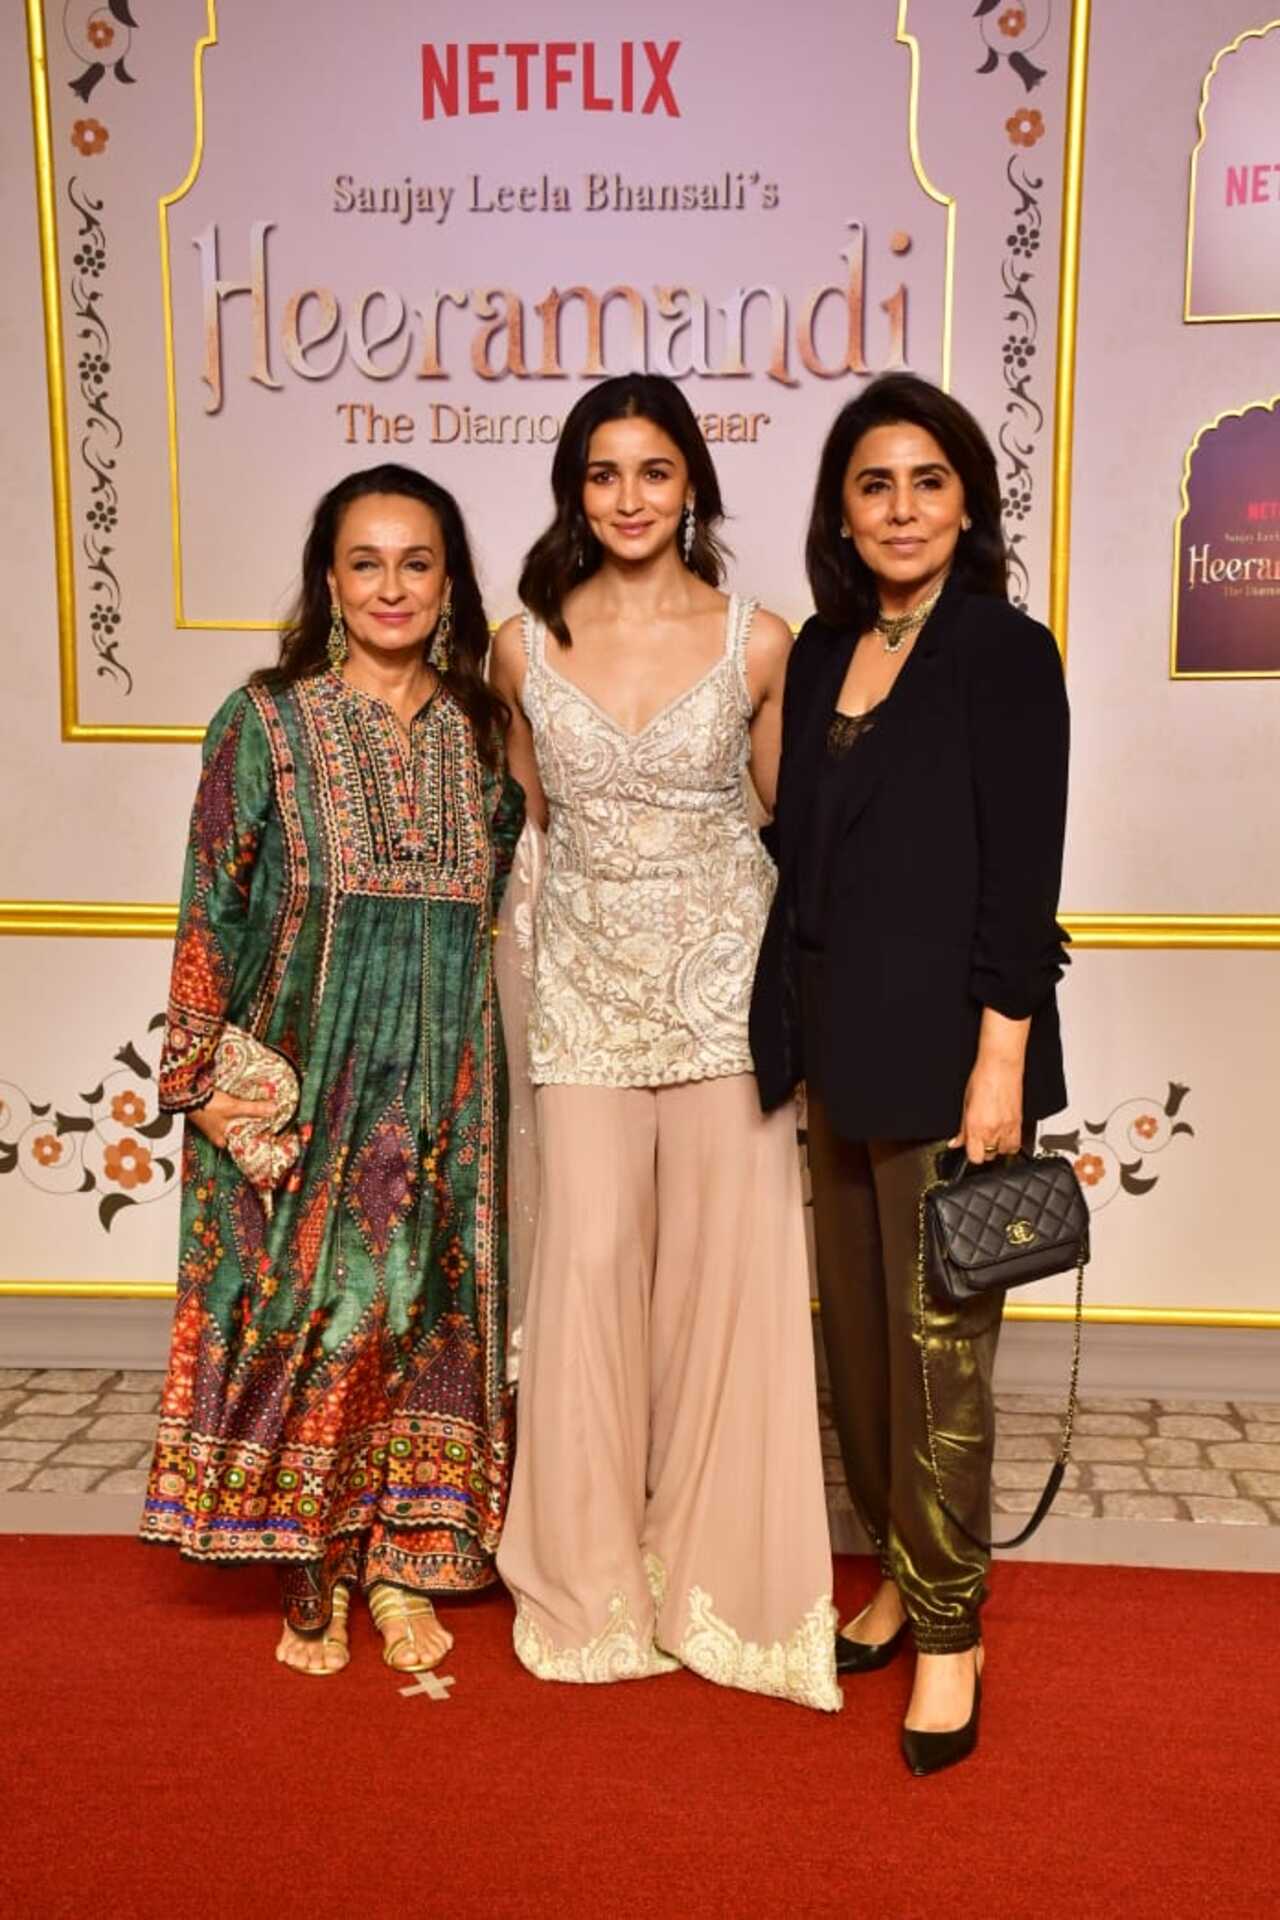 Alia Bhatt poses with her mother Soni Razdan and mother-in-law Neetu Kapoor on the red carpet